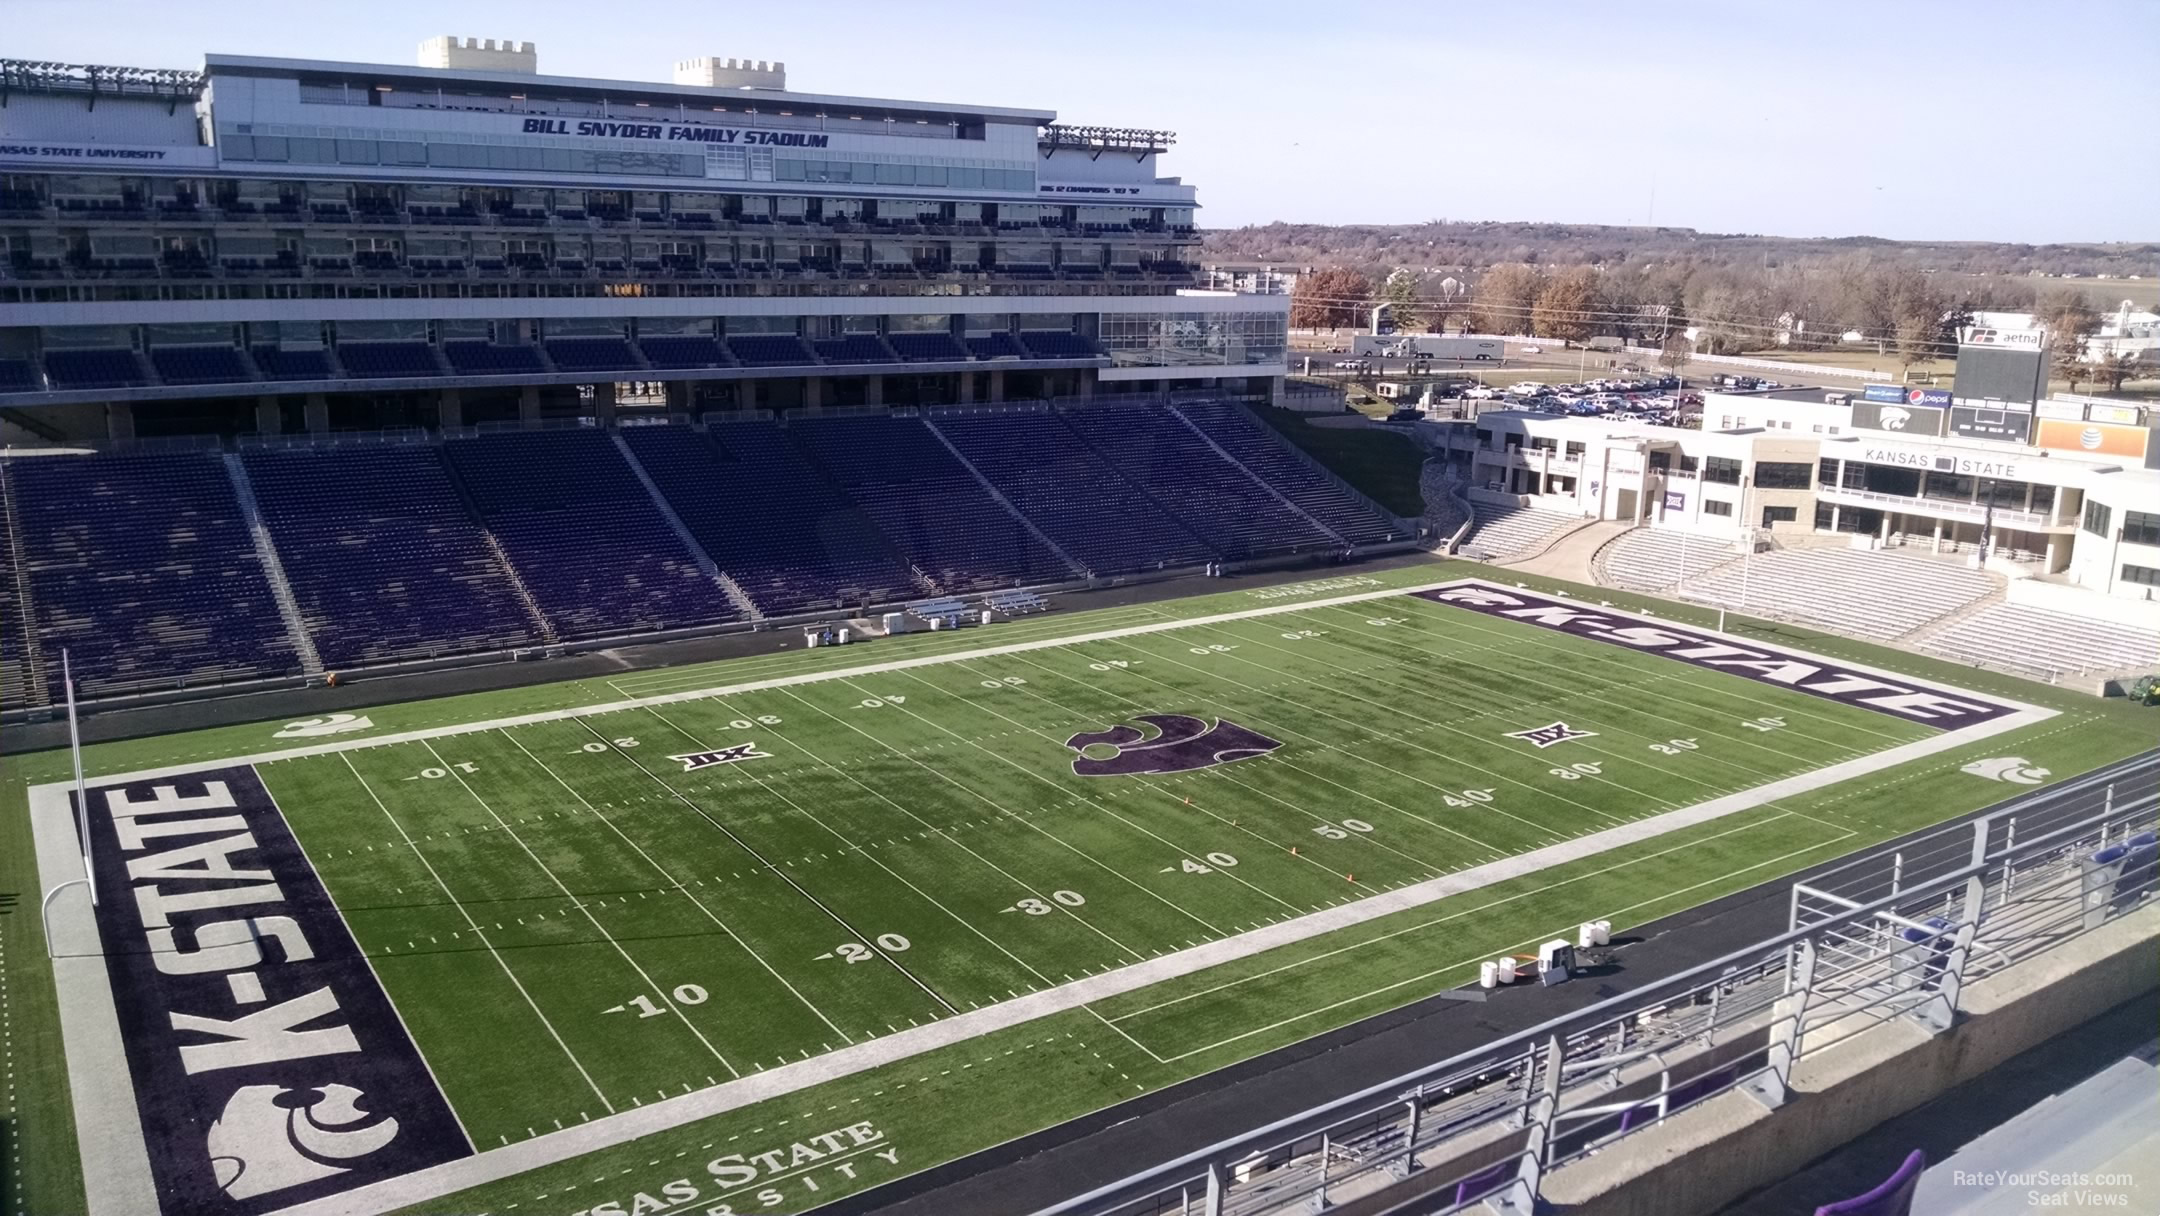 section 421, row 10 seat view  - bill snyder family stadium